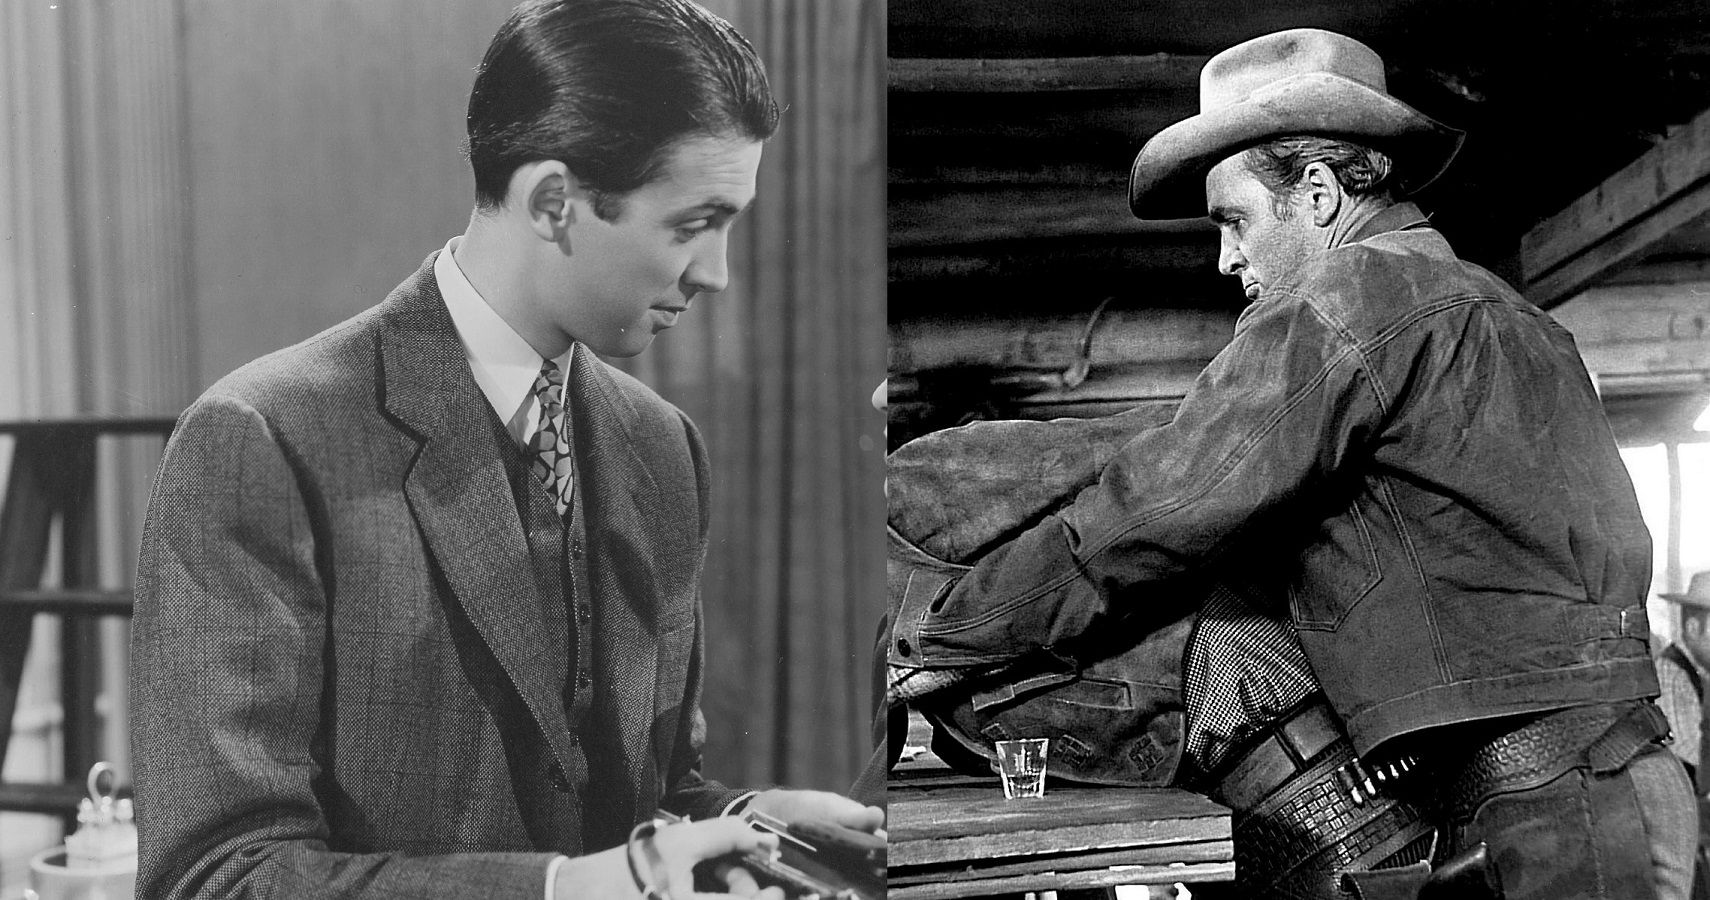 James Stewart's 10 Best Movies, According To Rotten Tomatoes